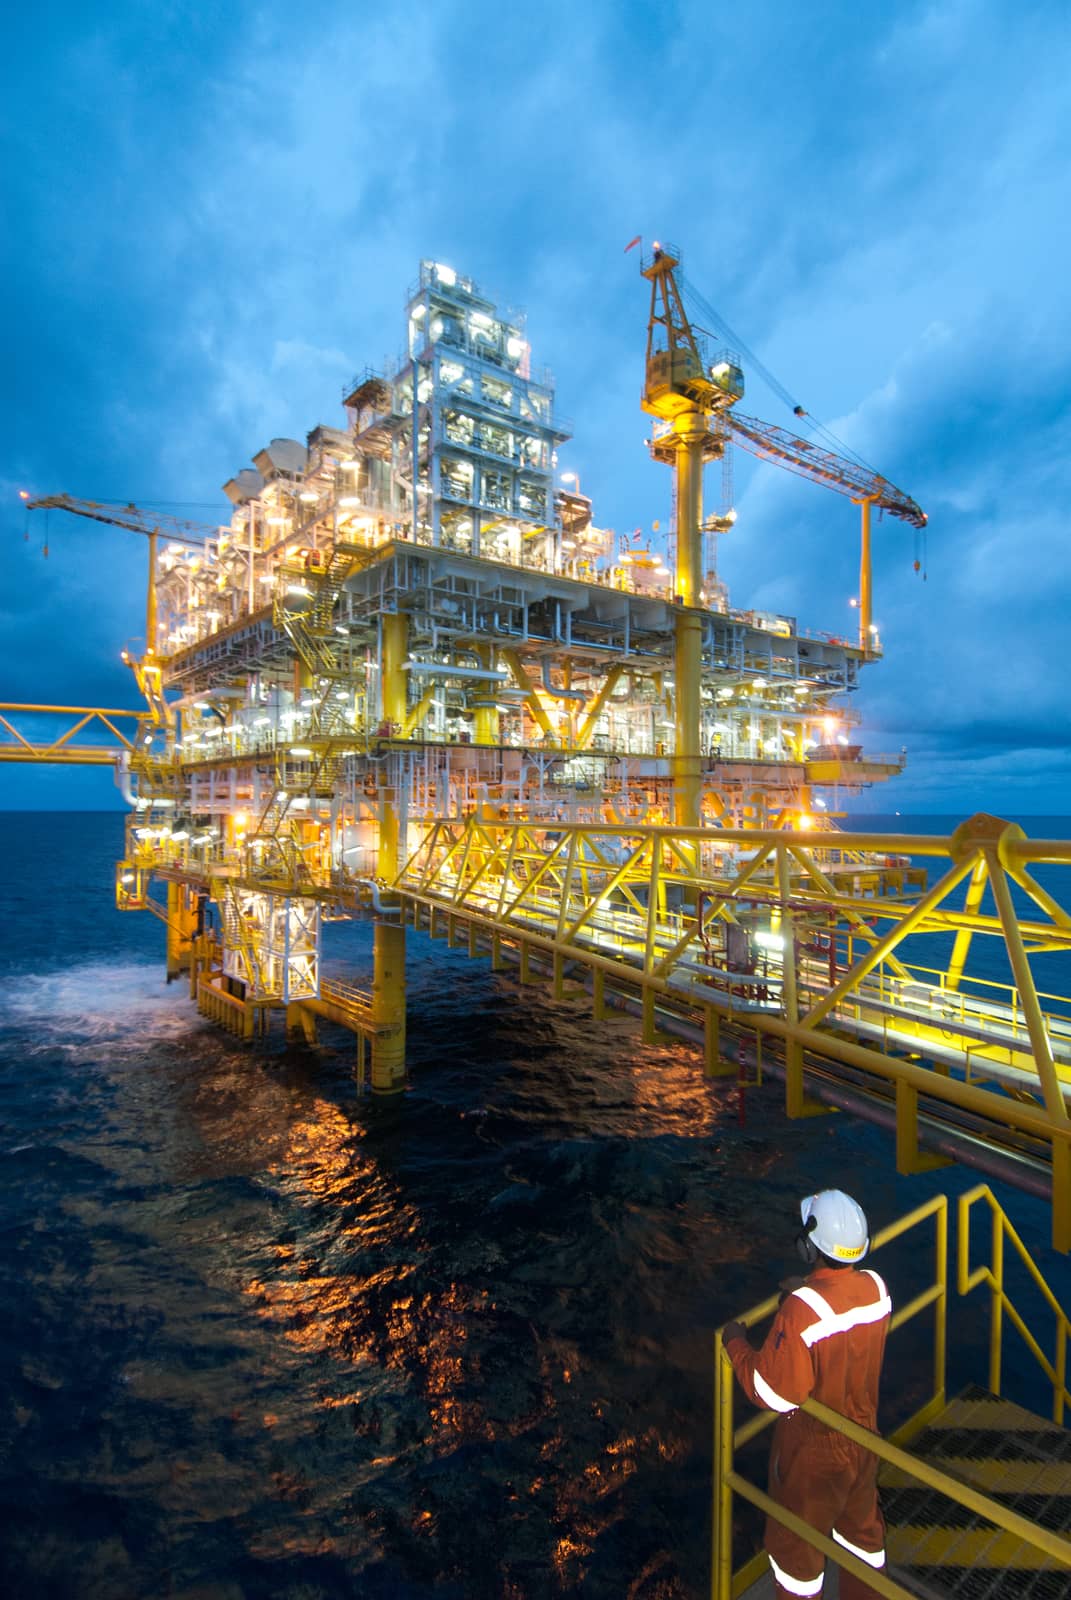 Oil and gas transfer platforms by think4photop